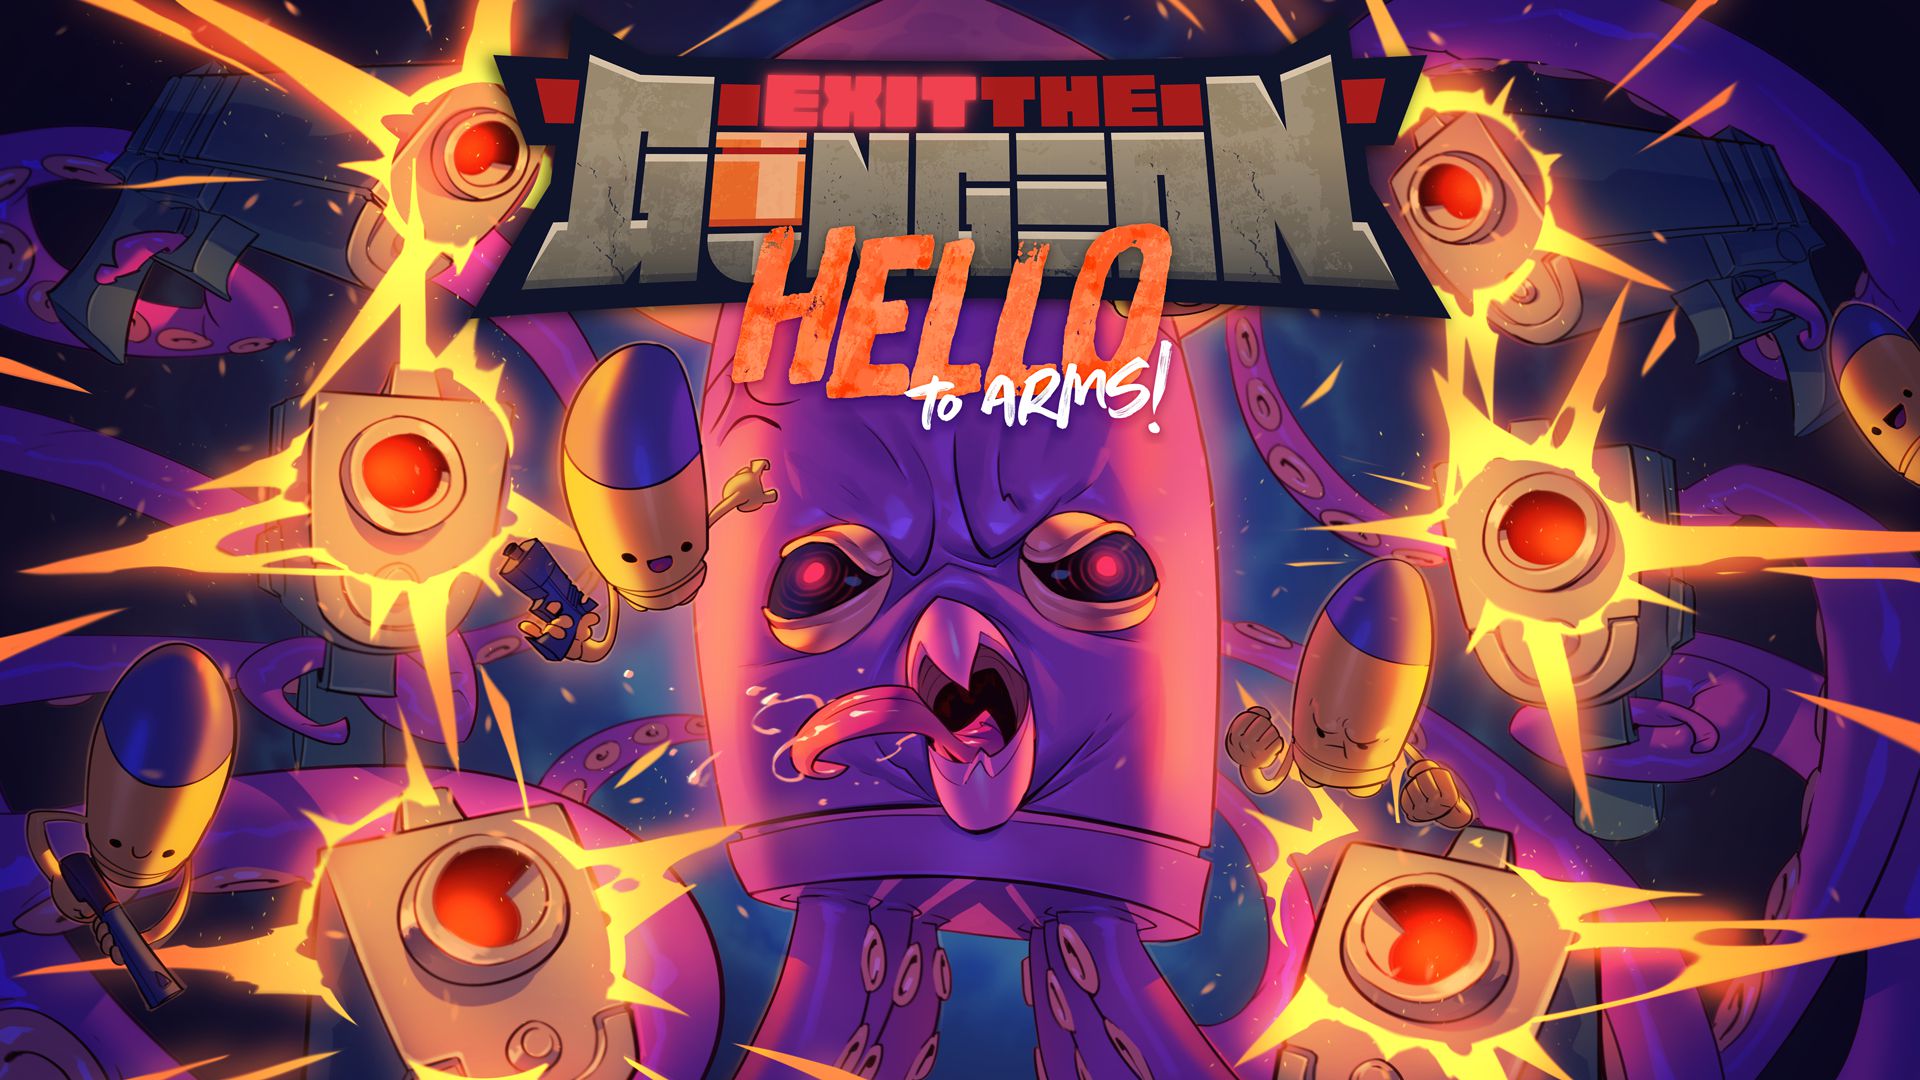 Exit the Gungeon Hello to Arms!